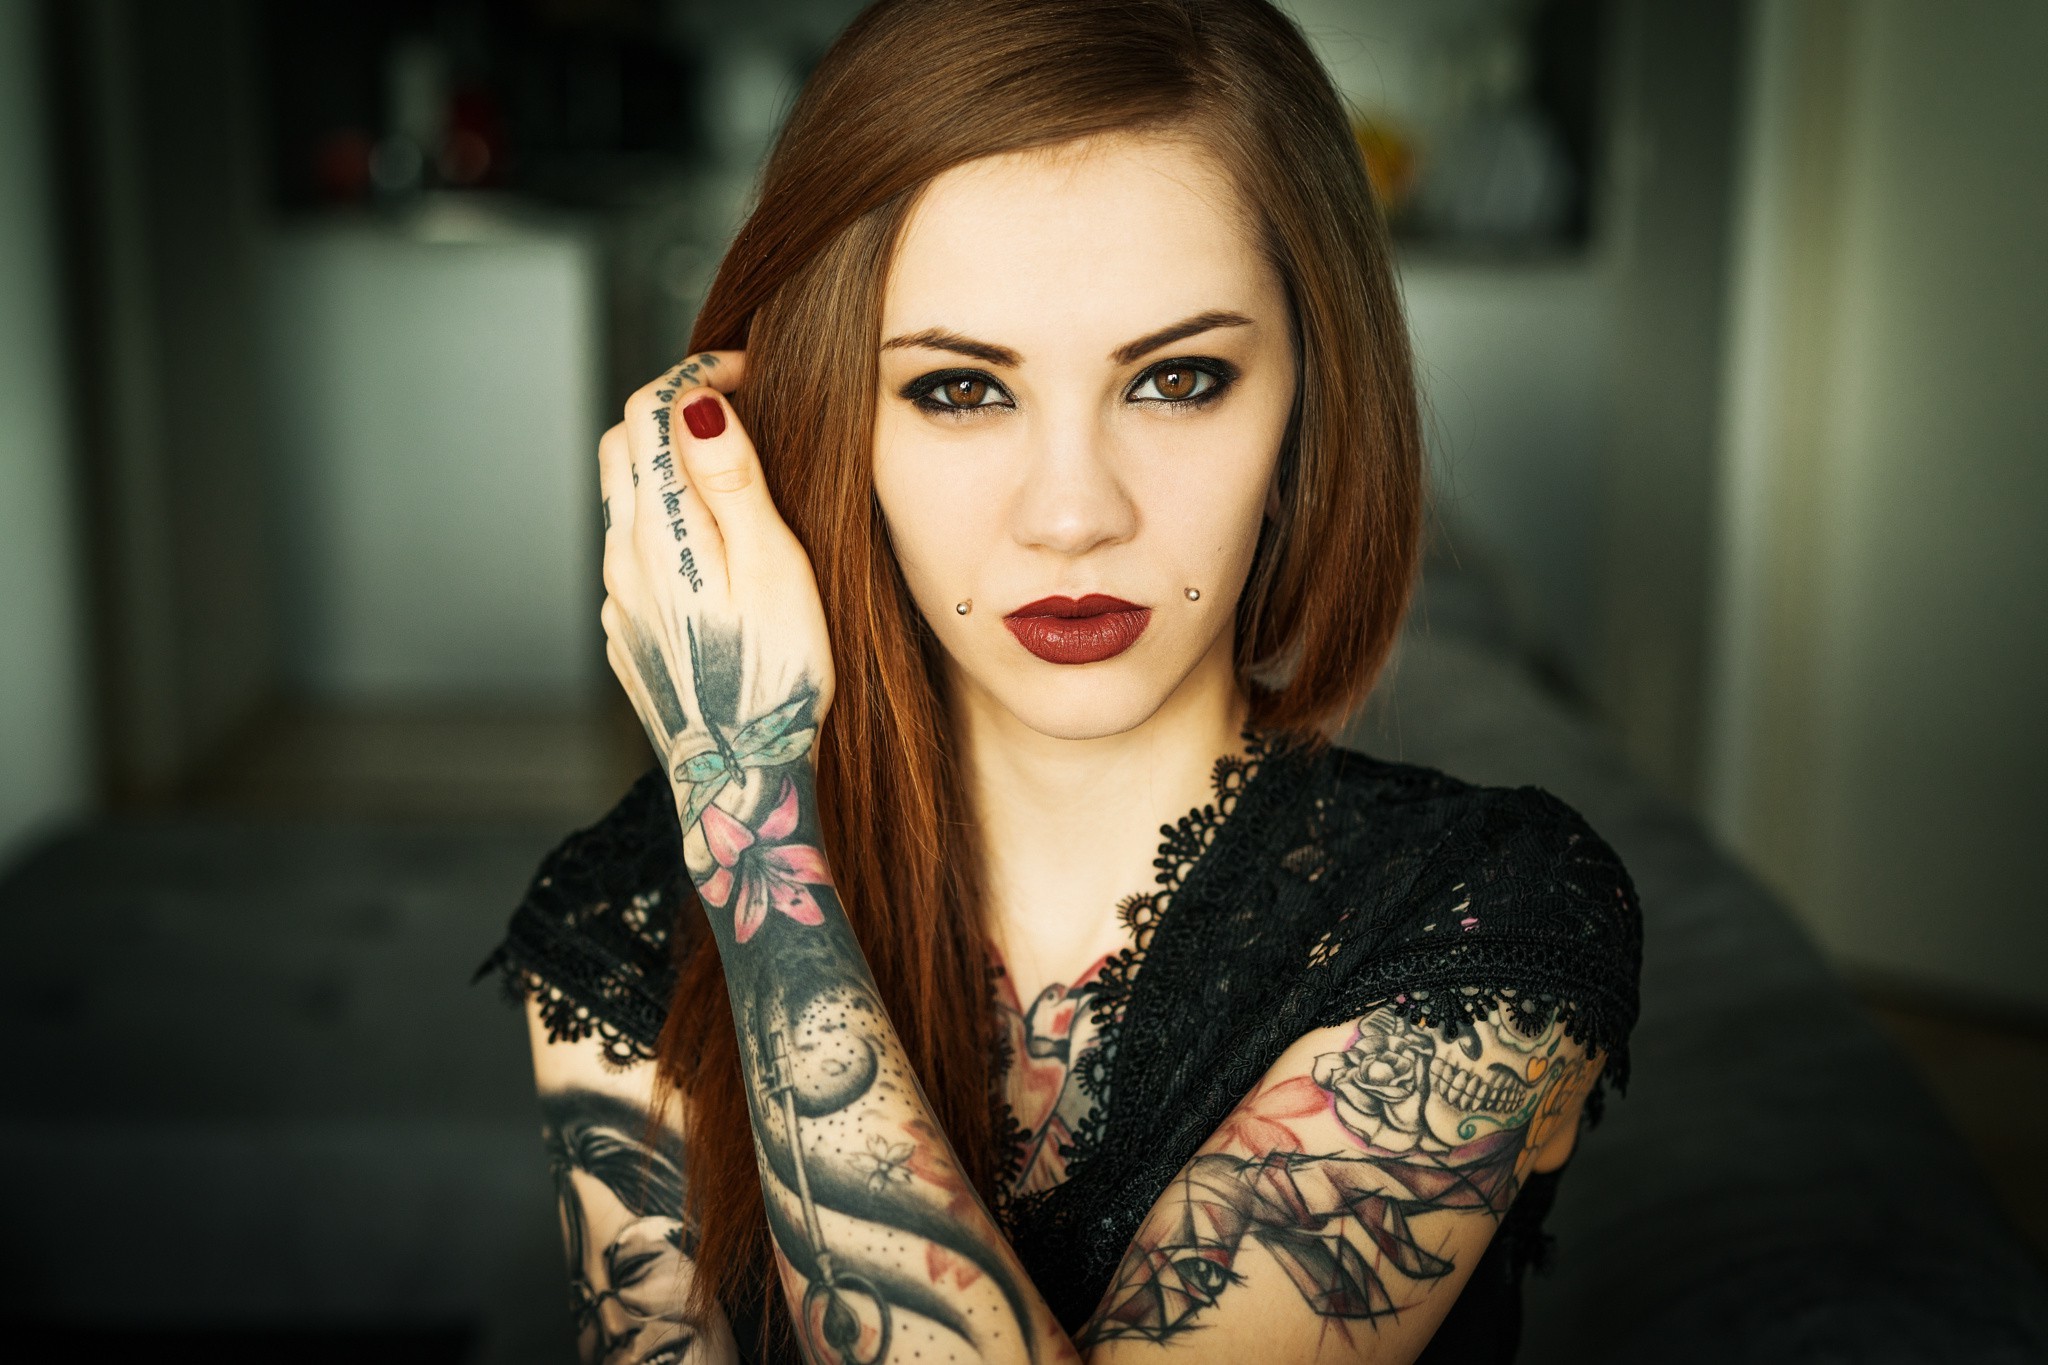 women, Tattoos, Face, Brunette, Looking At Viewer, Brown Eyes, Piercing, Red Nails Wallpaper